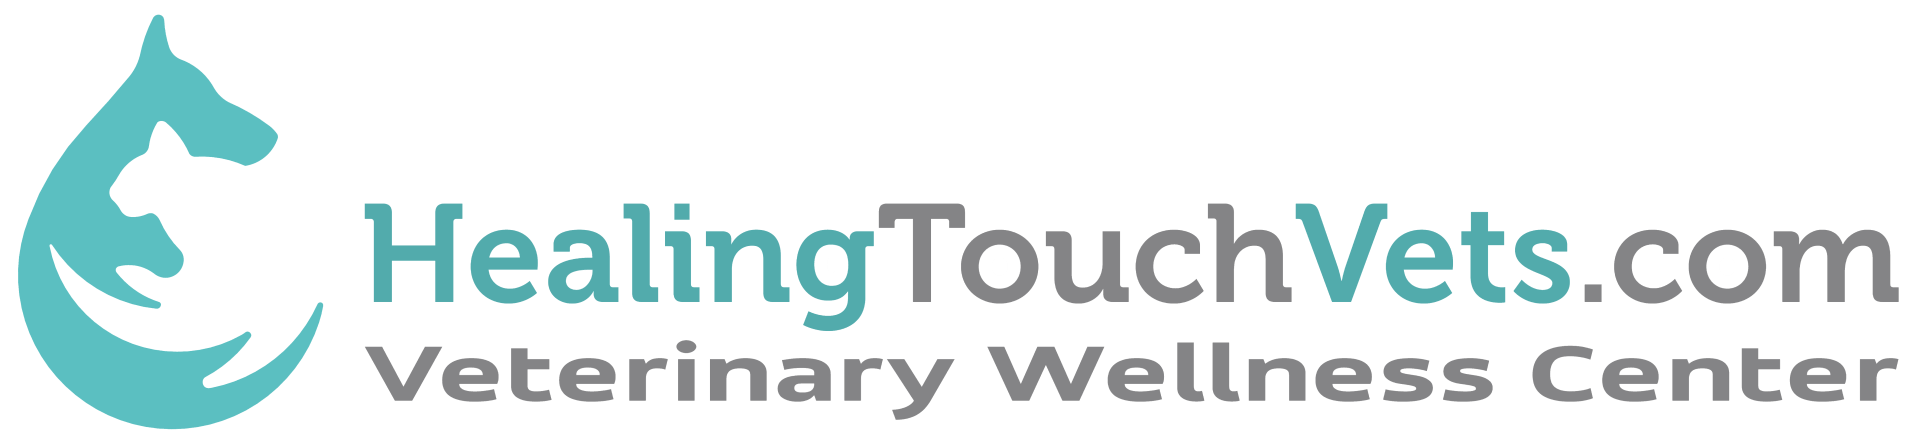 Healing Touch Vets